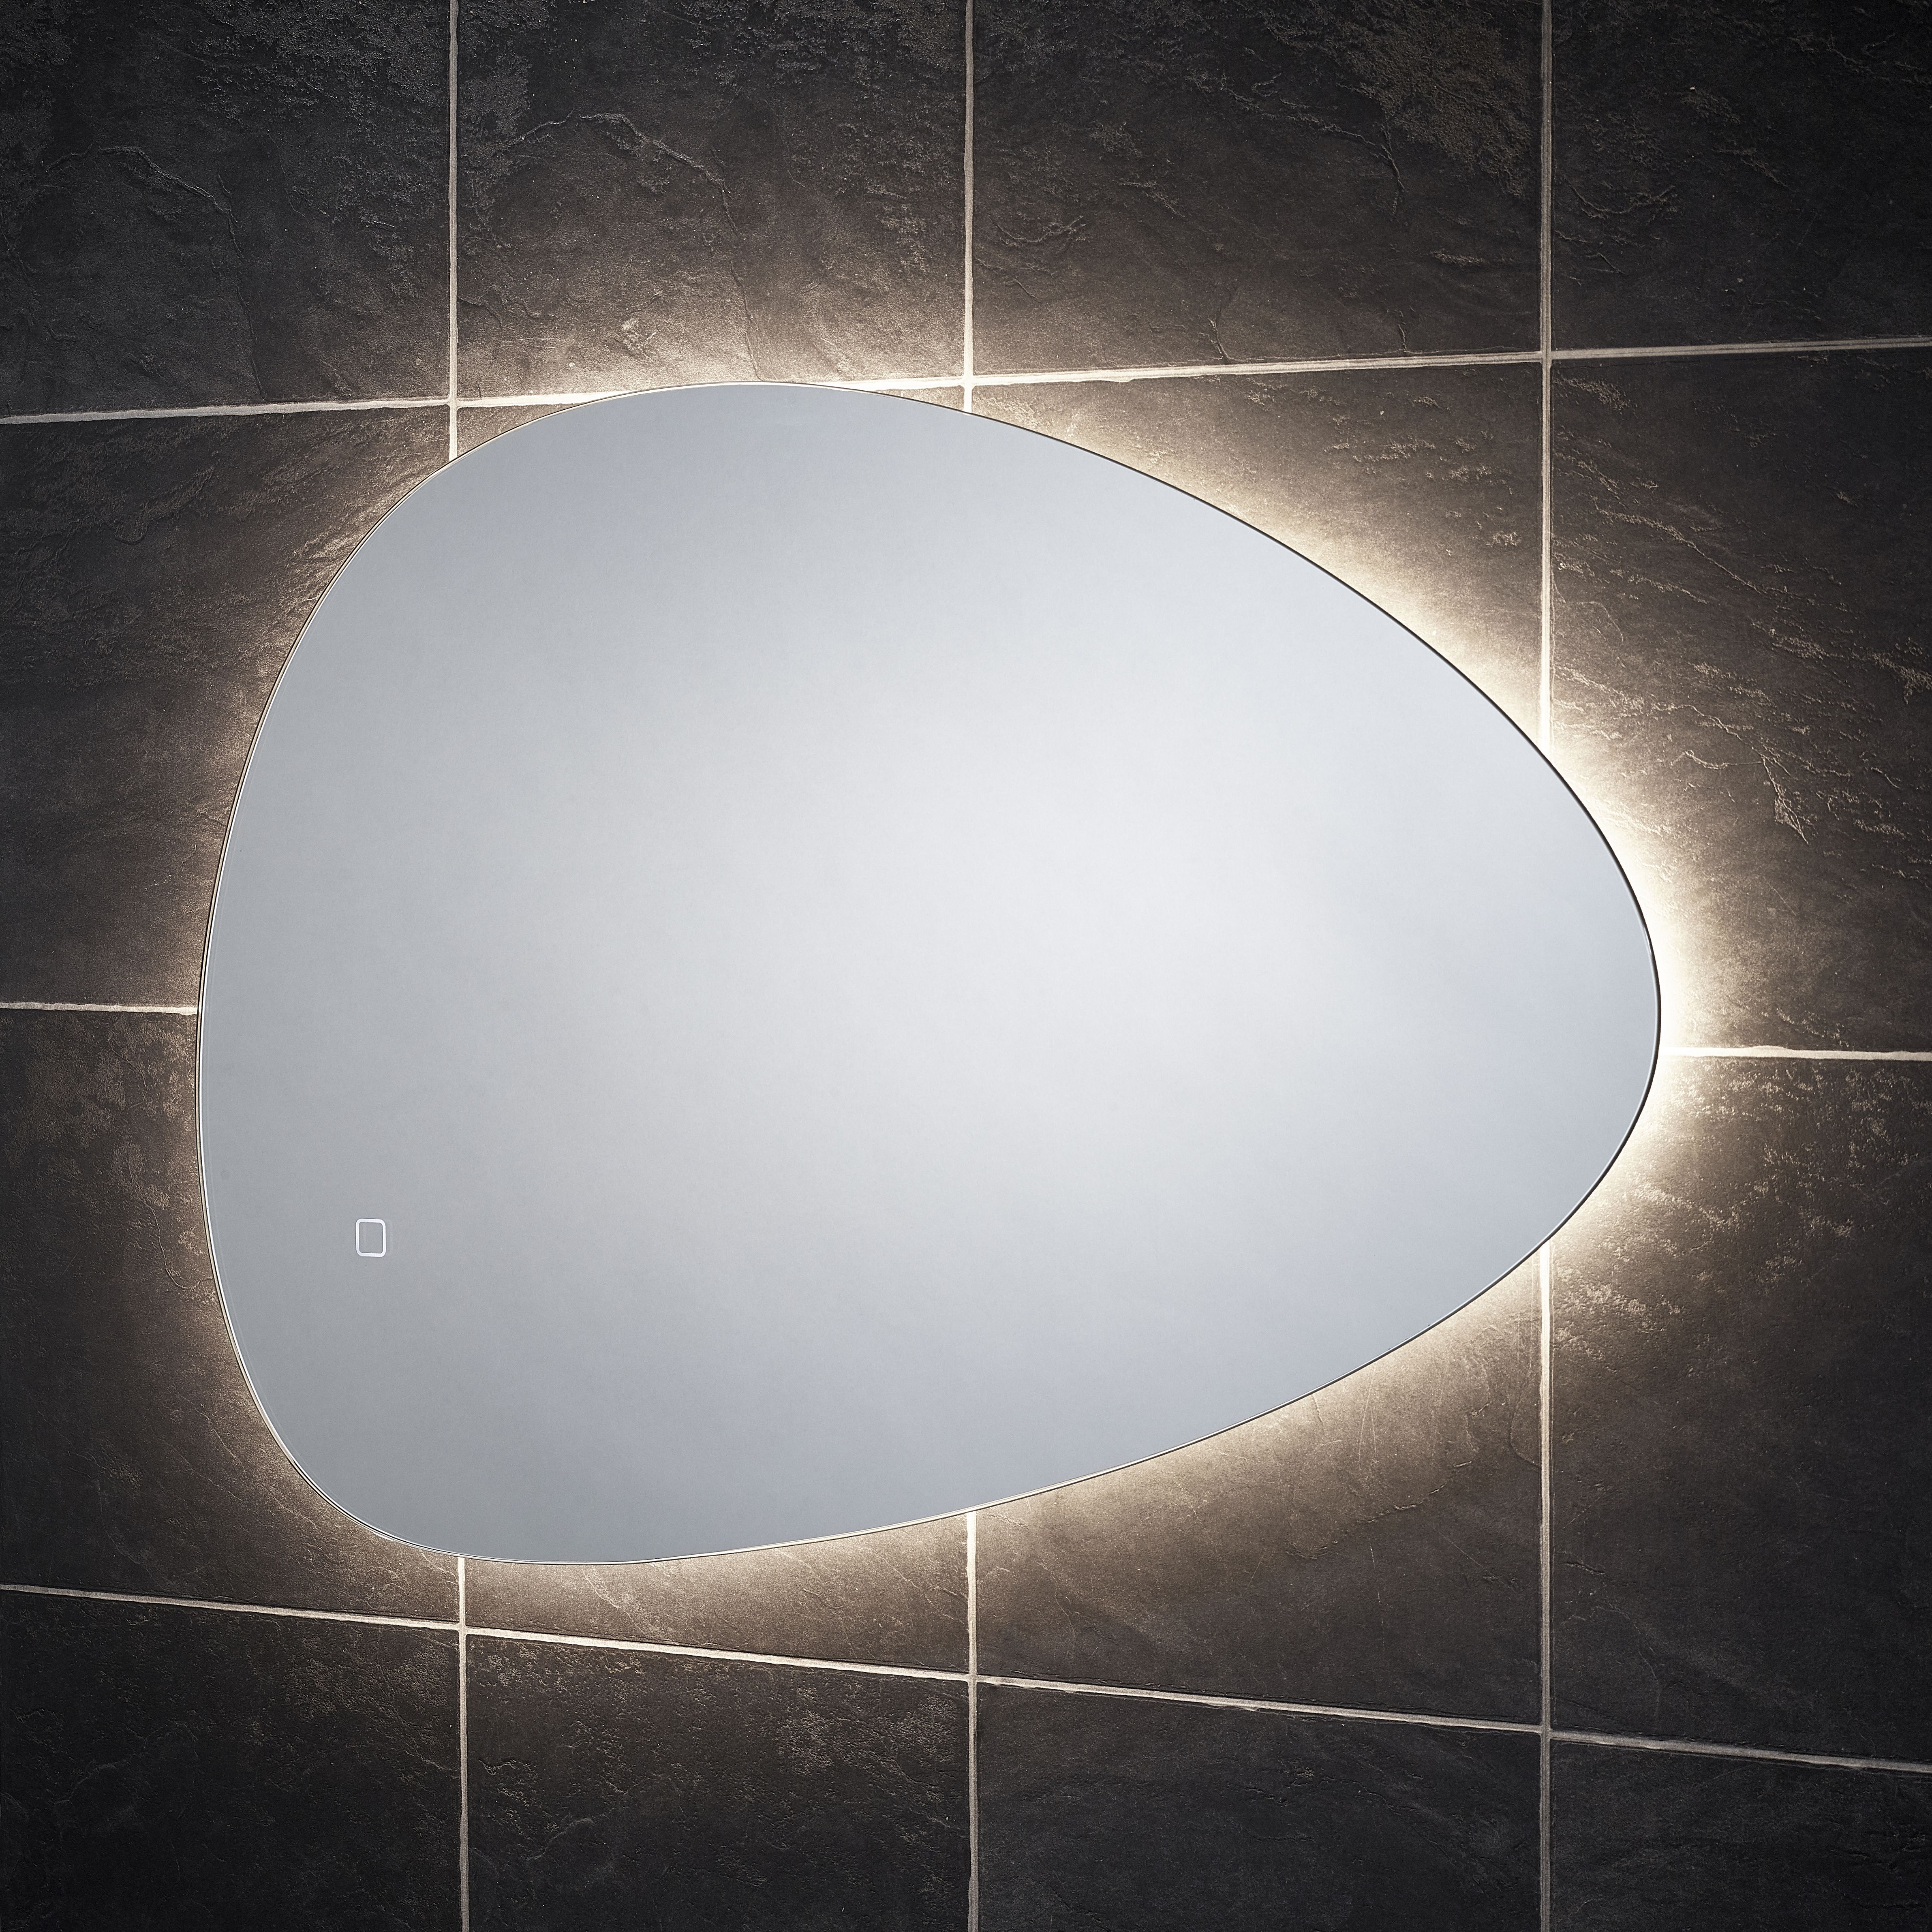 Sensio Mistral Curved Wall-mounted Bathroom Illuminated Colour-changing mirror (H)80cm (W)55cm